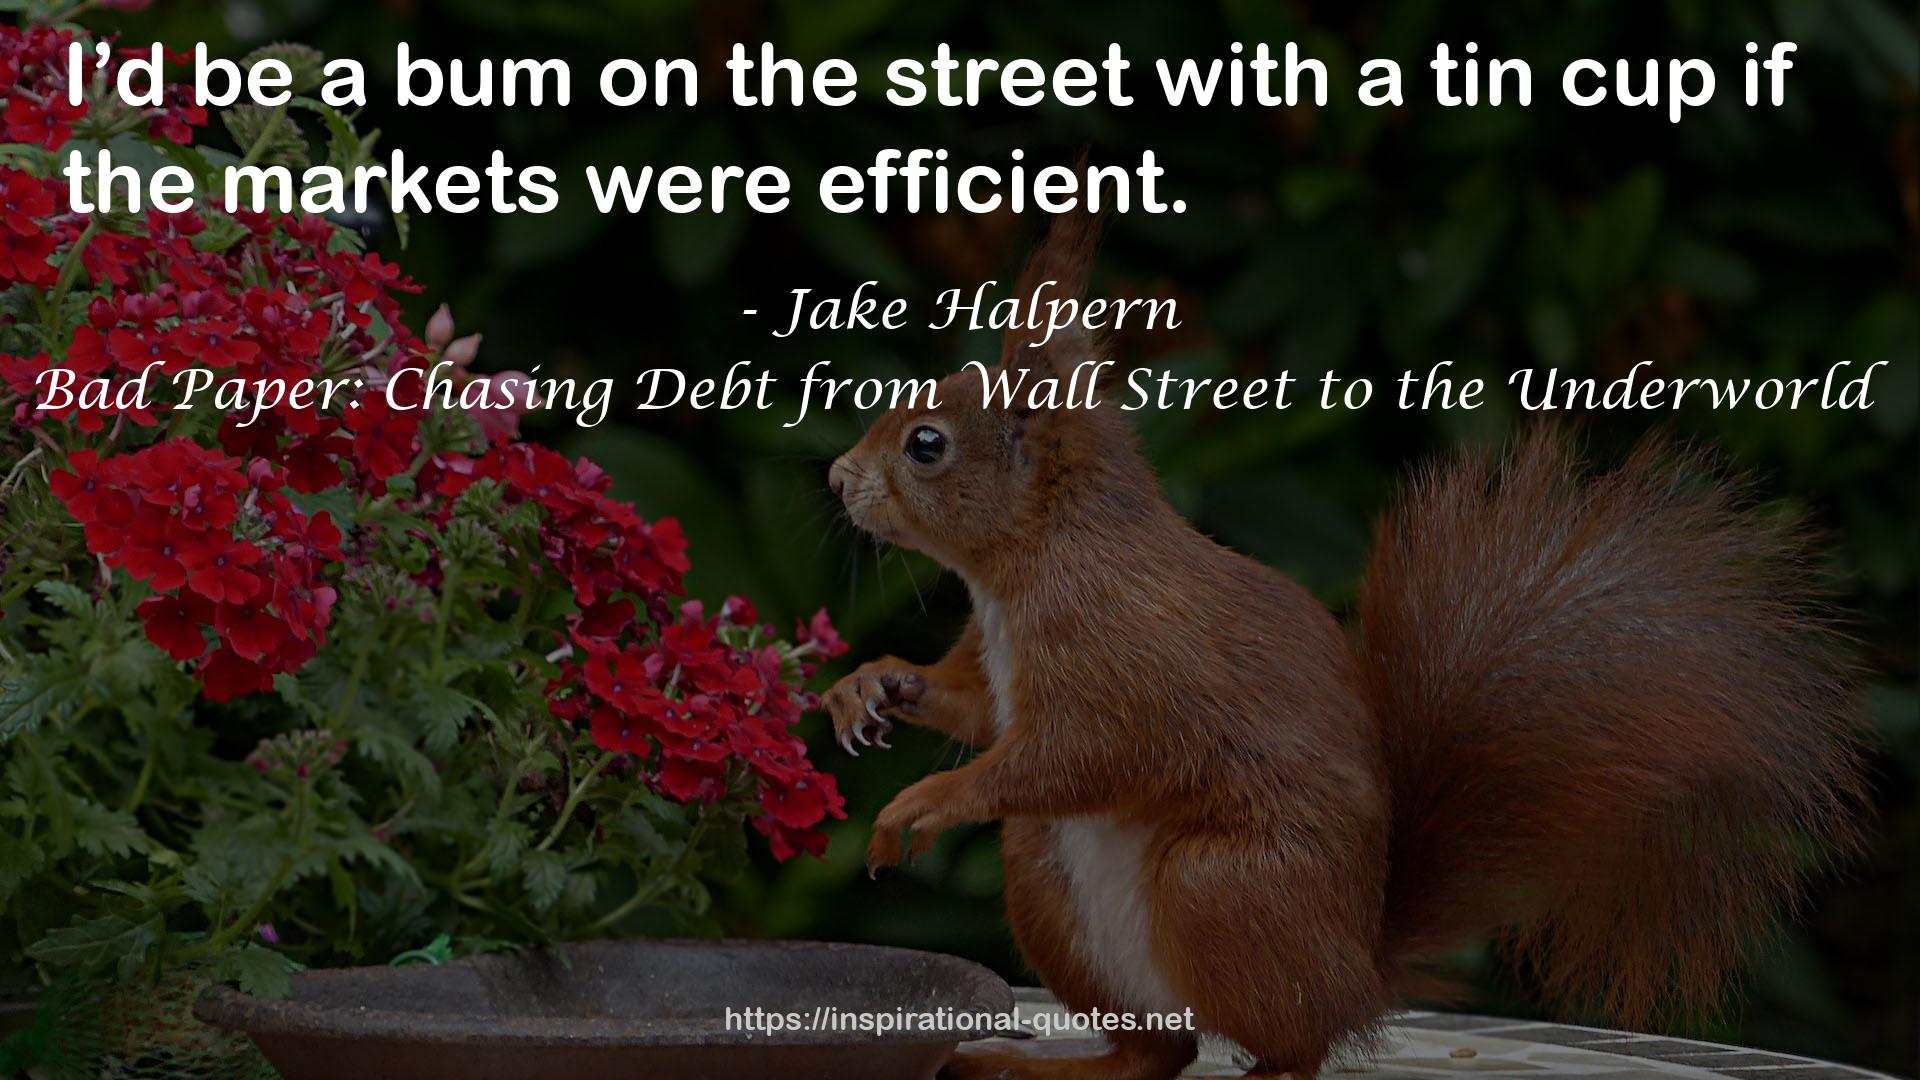 Bad Paper: Chasing Debt from Wall Street to the Underworld QUOTES